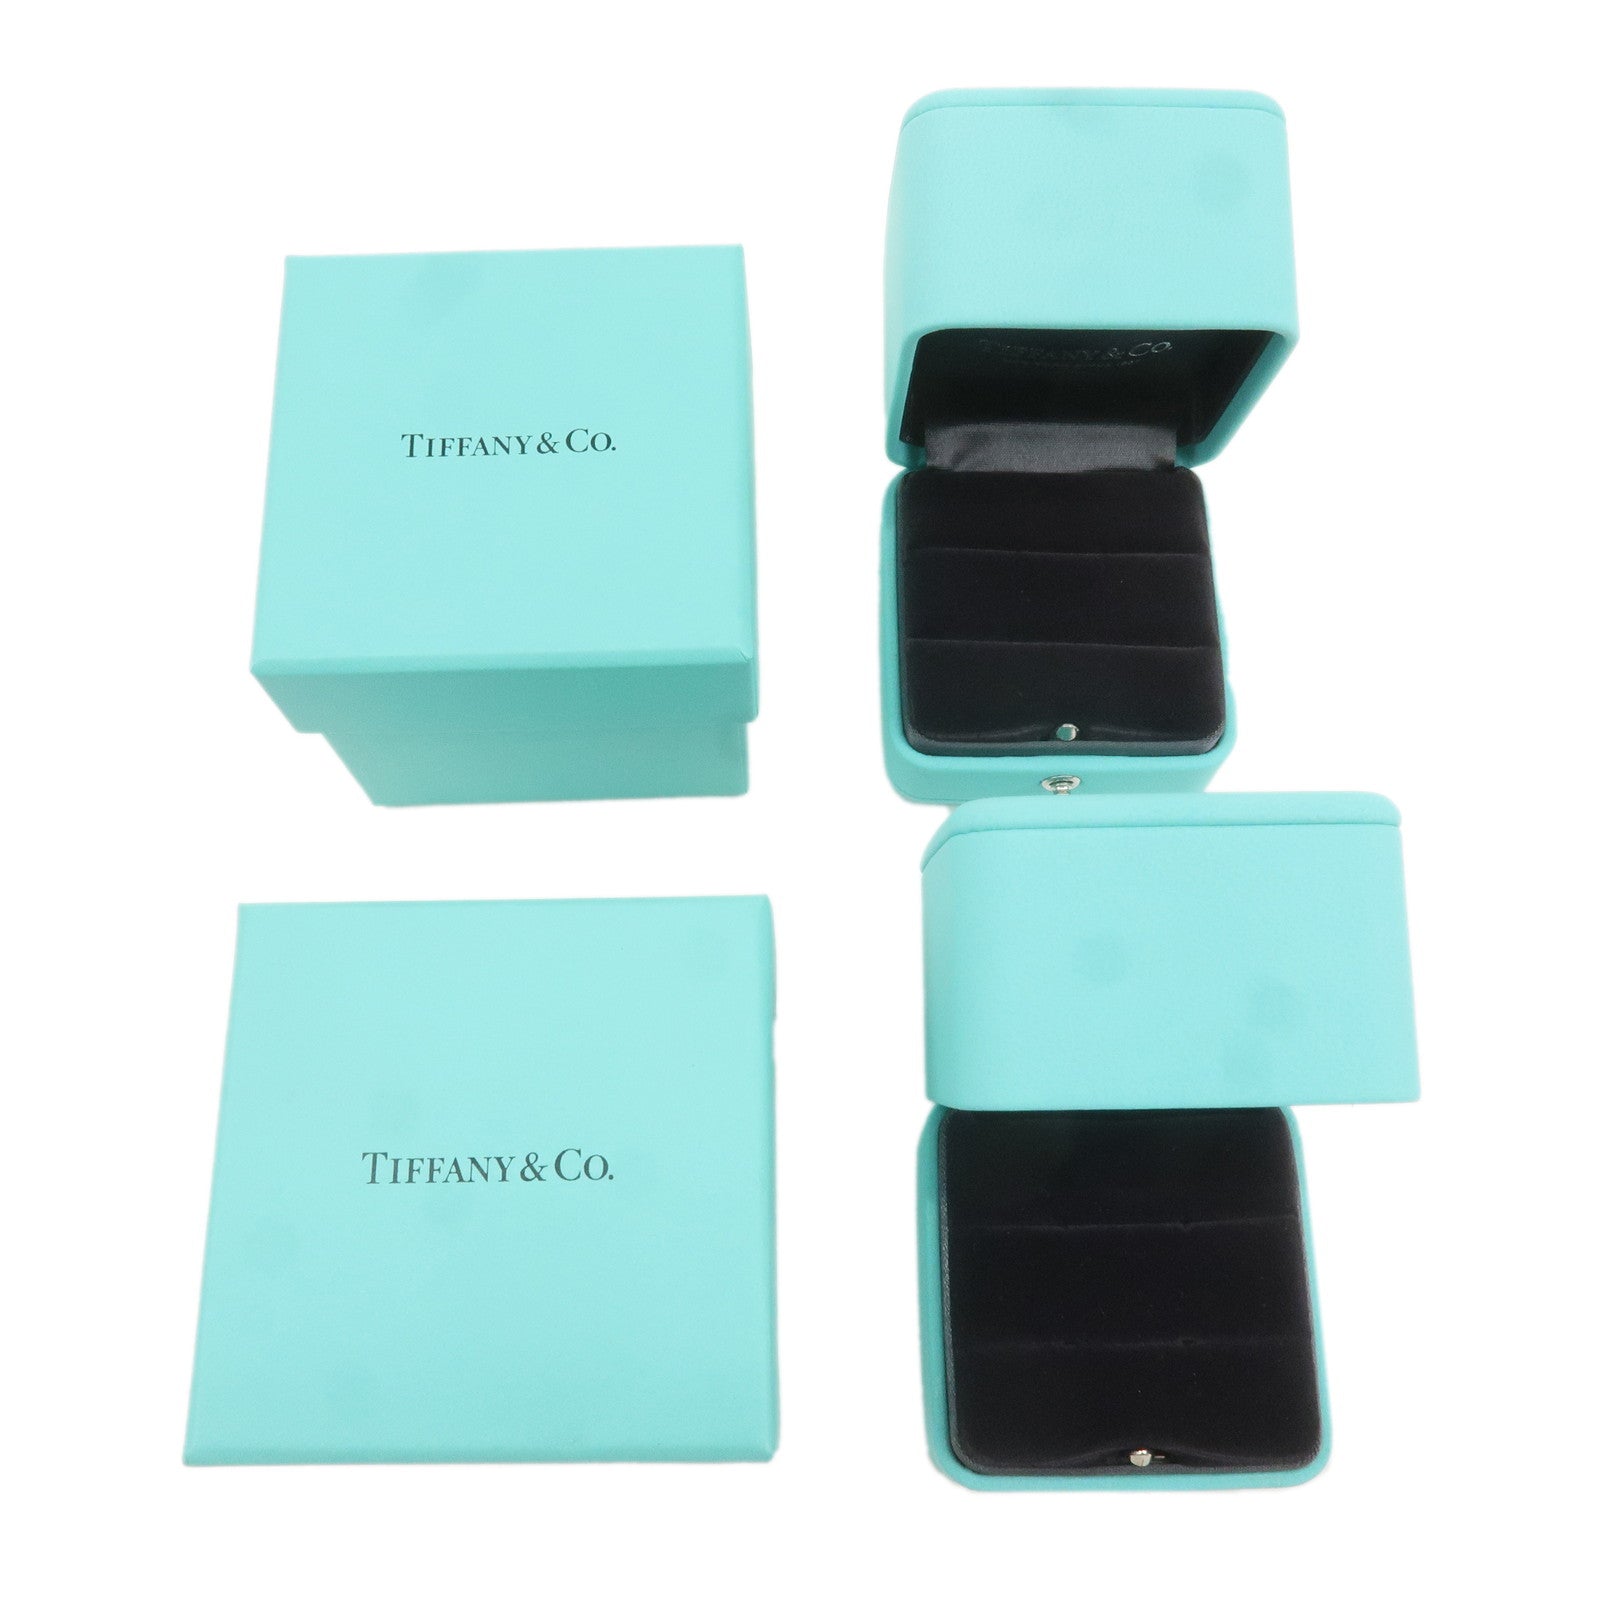 Tiffany&Co.-Set-of-2-Jewelry-Box-For-Pair-Rings-Tiffany-Blue